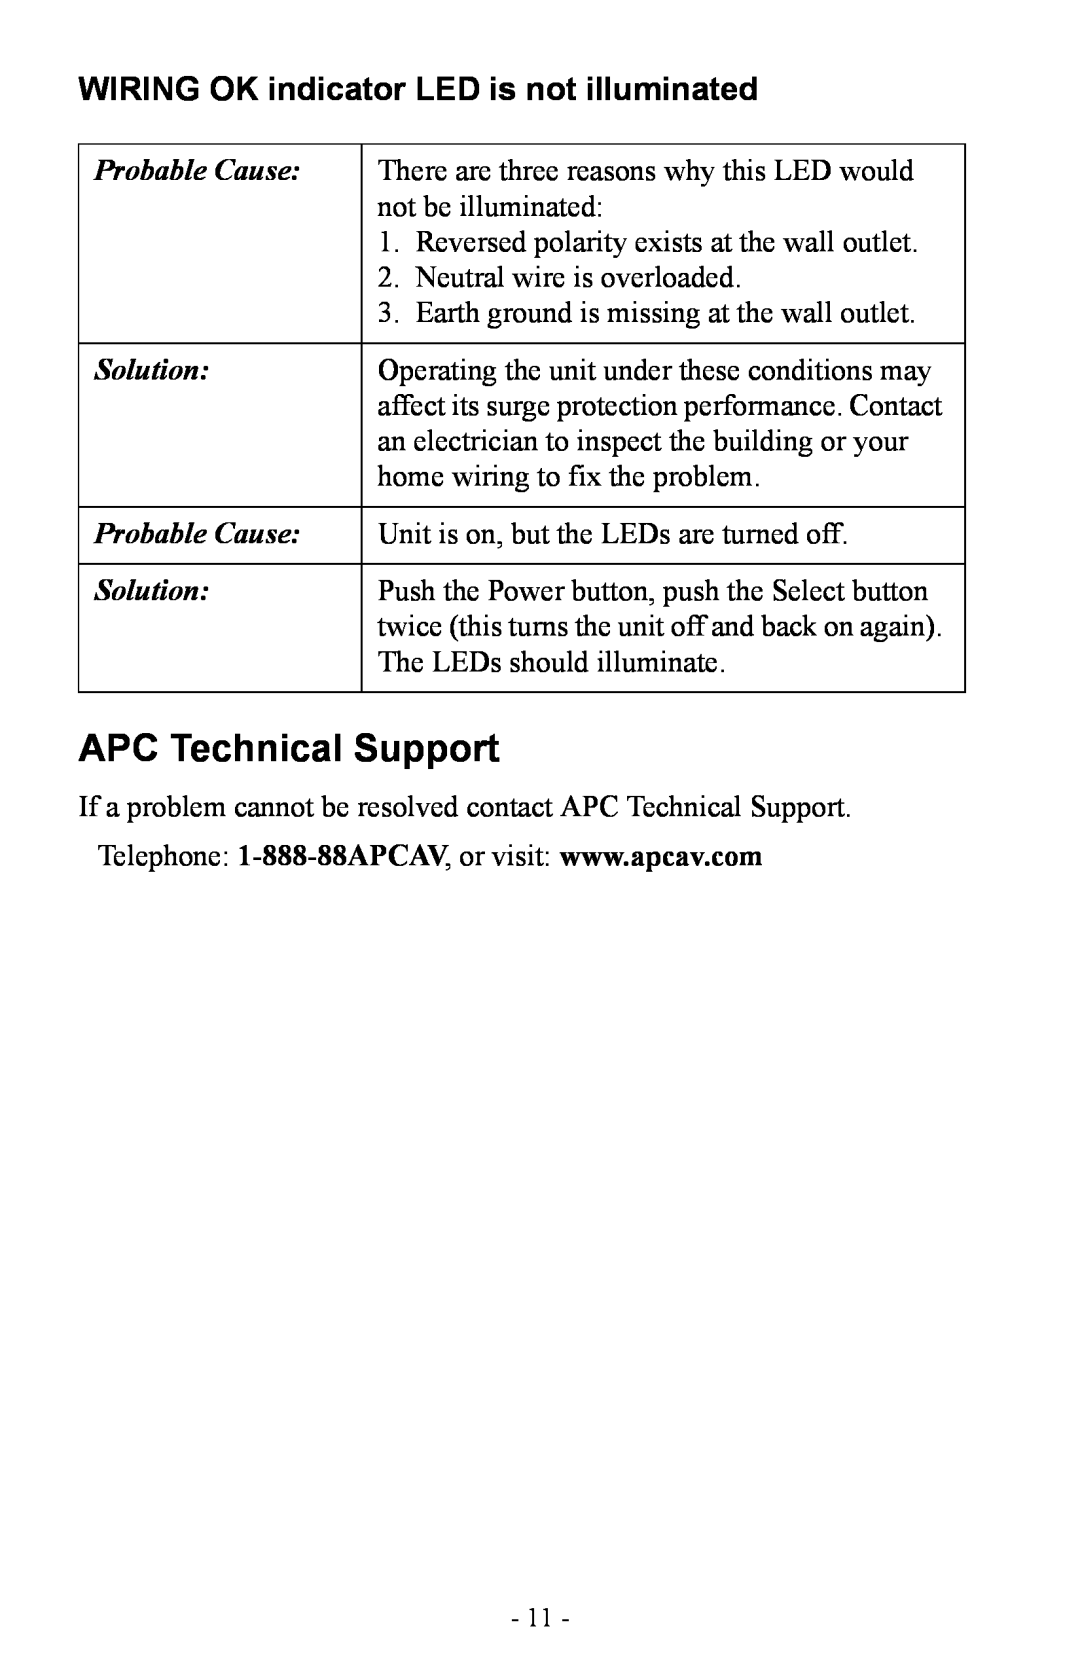 APC Model C3 and C3BLK user manual APC Technical Support, Probable Cause, Solution 